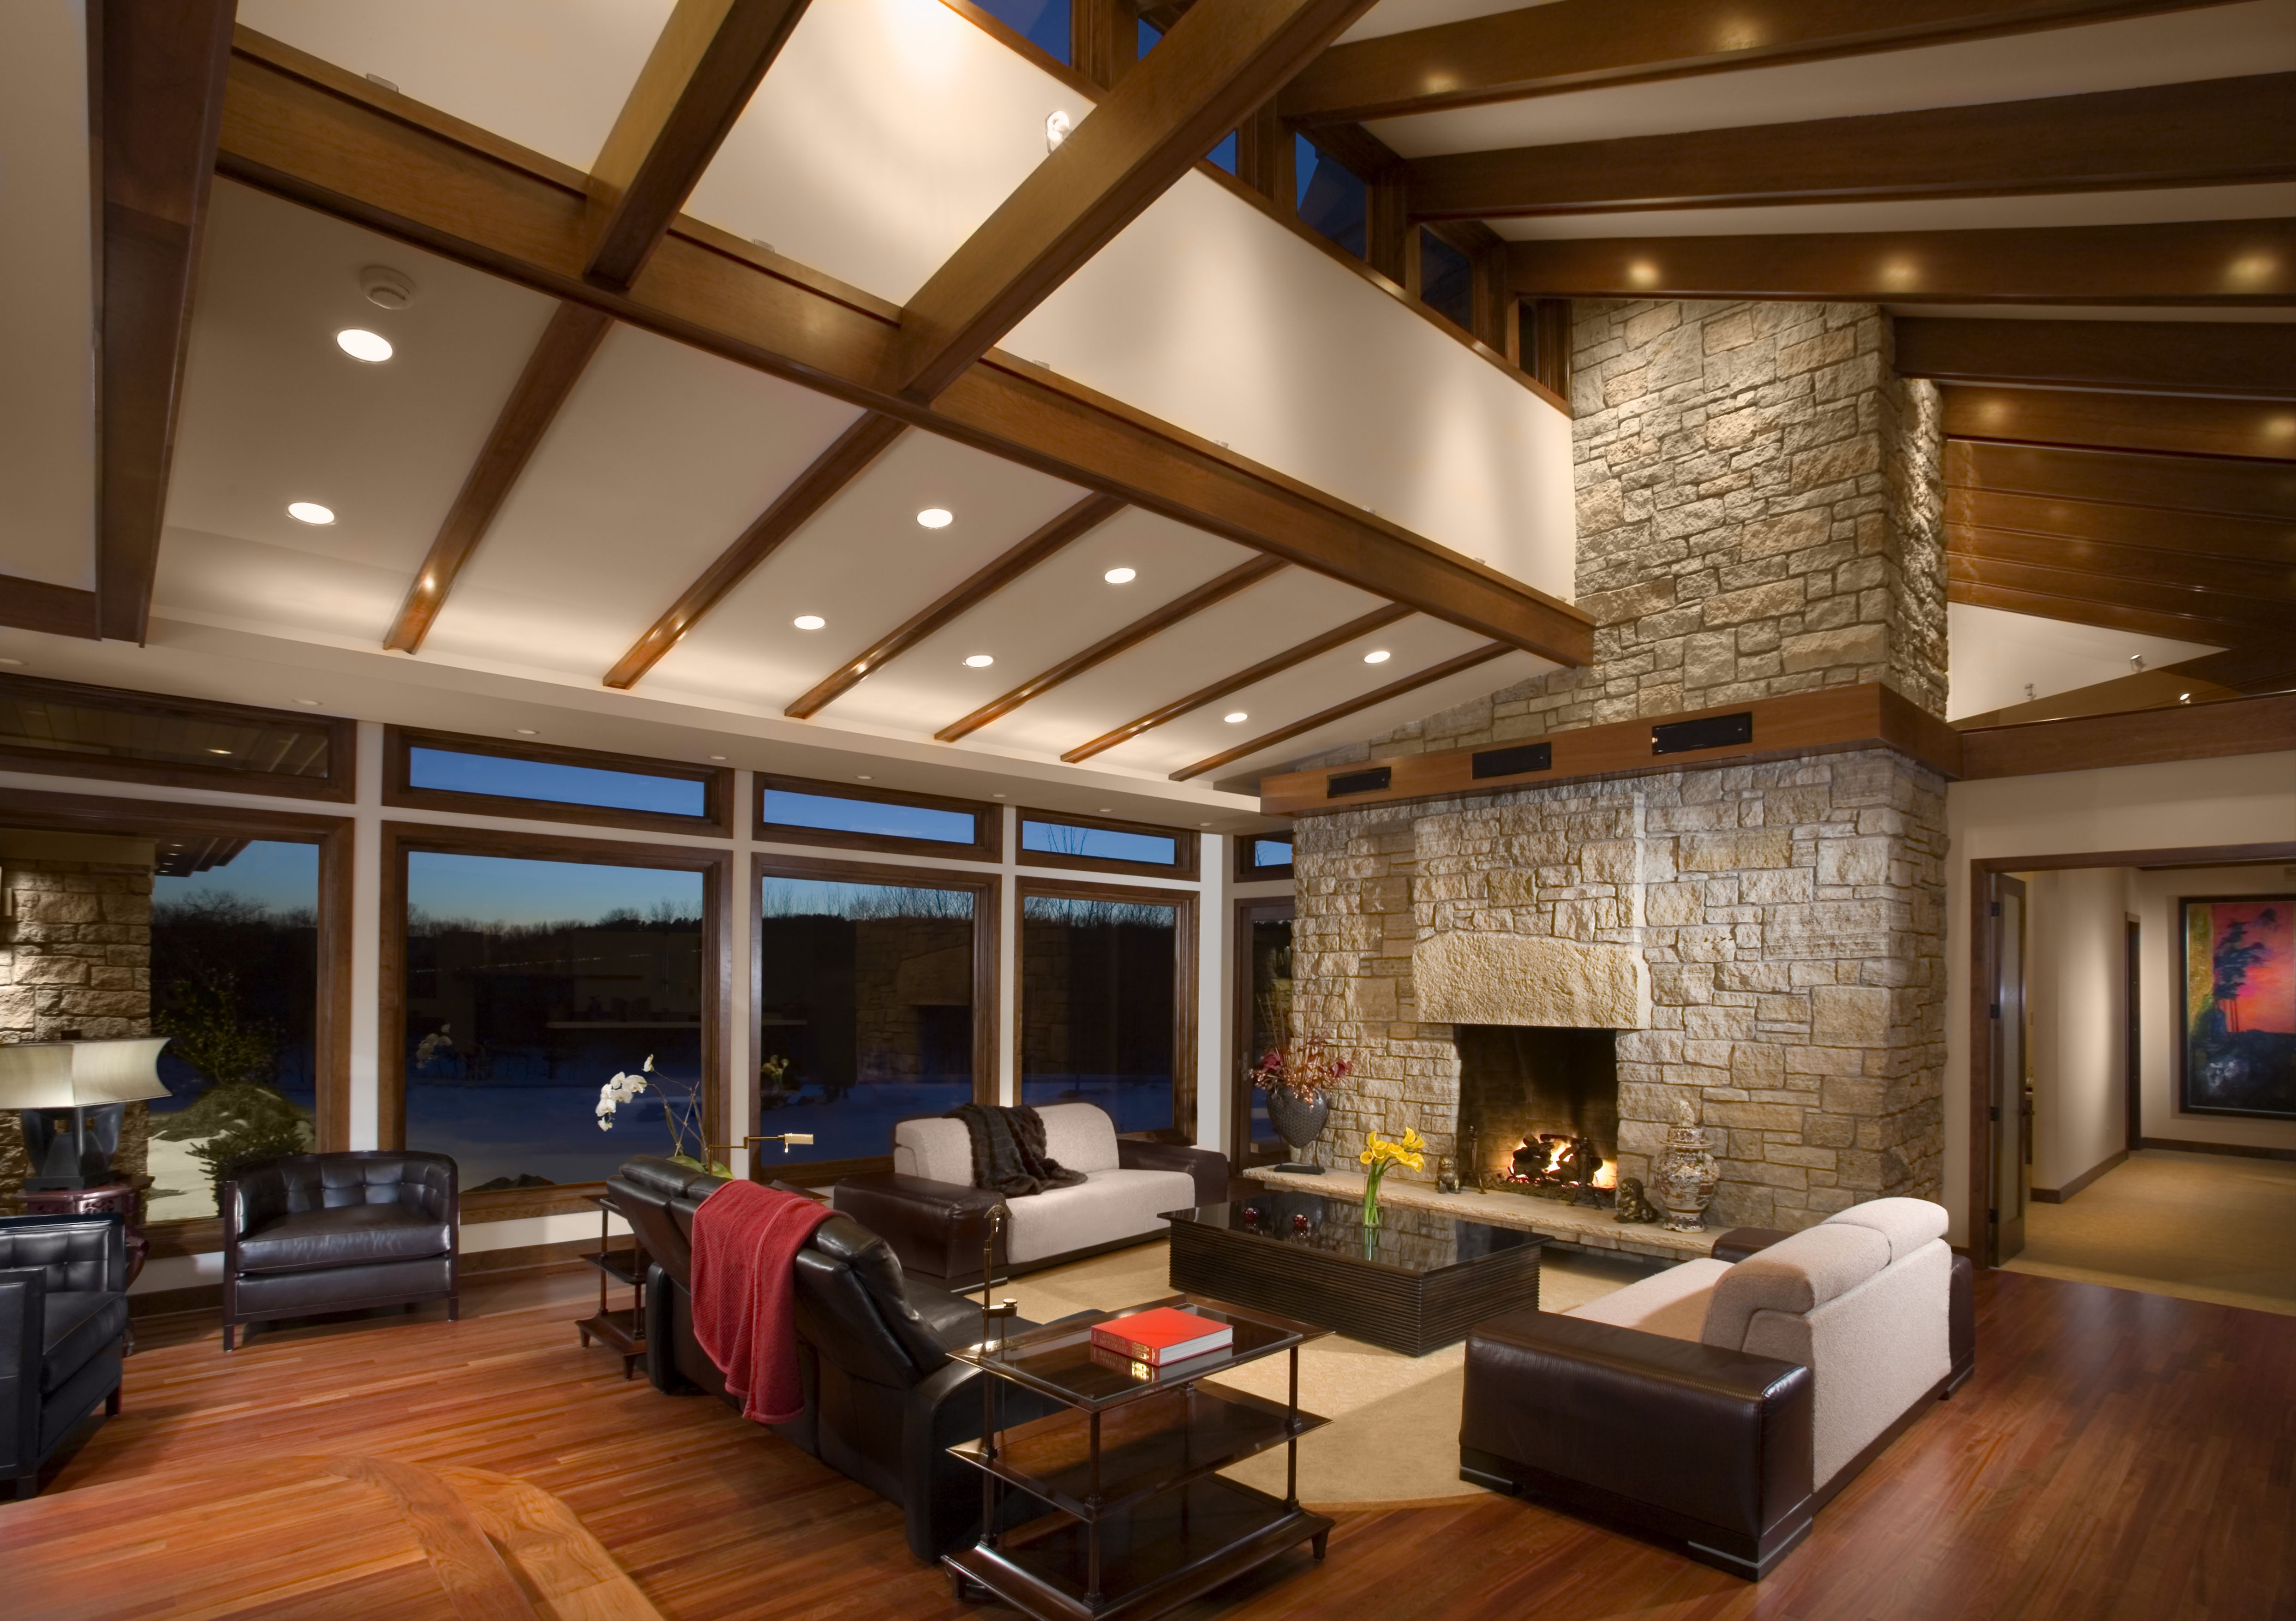 Living Room Fans In Vaulted Ceilings